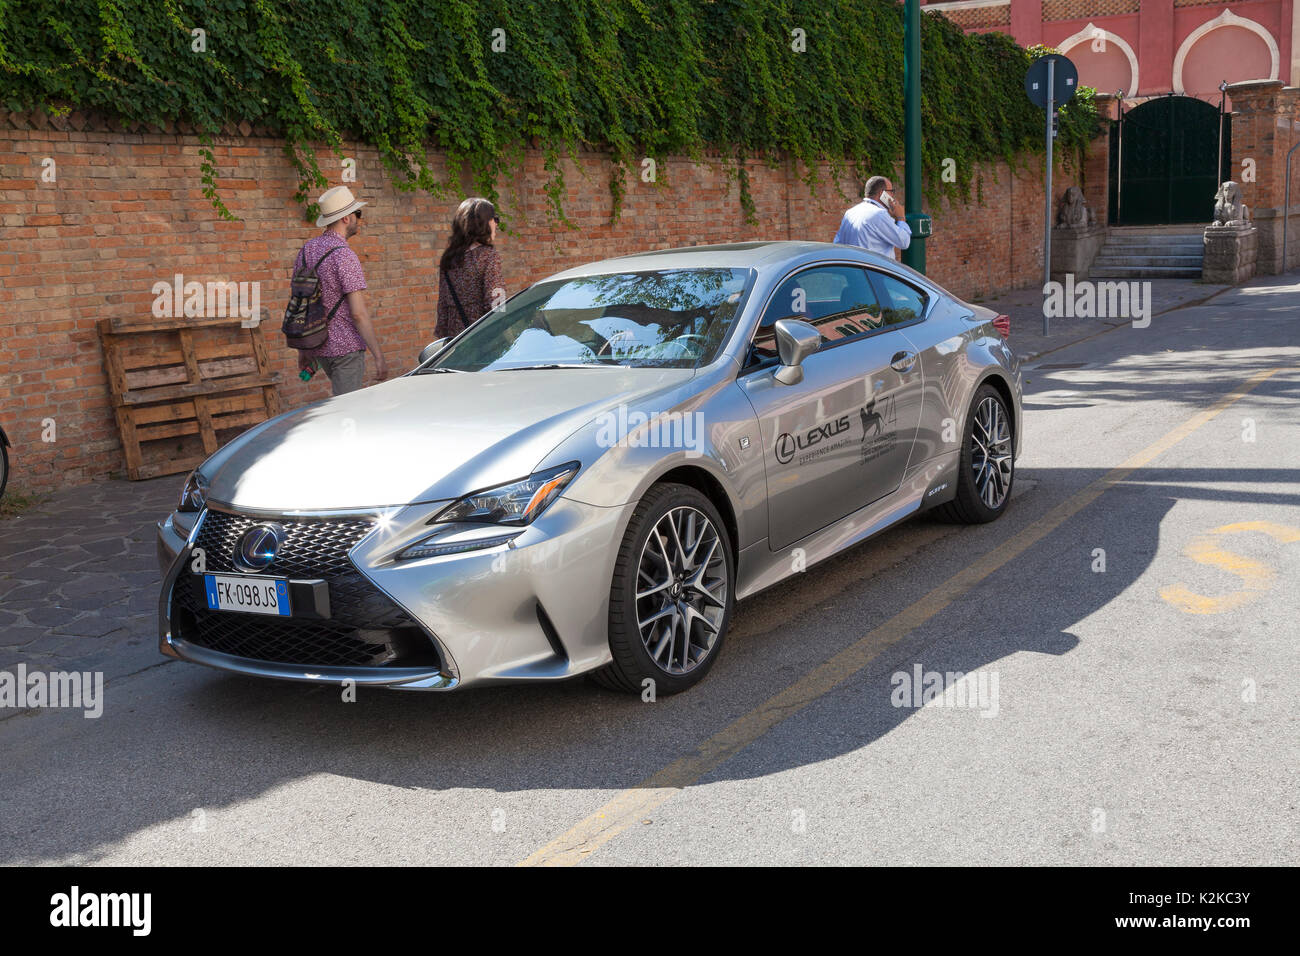 Lido, Venice, Italy. 30th Aug, 2017. Venues for the 2017 Film Festival after last minute preparations and installations and before the crowds arrive for the opening of the festival. Lexus is one of the major sponsors of this years Film Festival and this car with the official logo is parked in front of the Mostra Internazionale d'Arte Cinematografica. Stock Photo